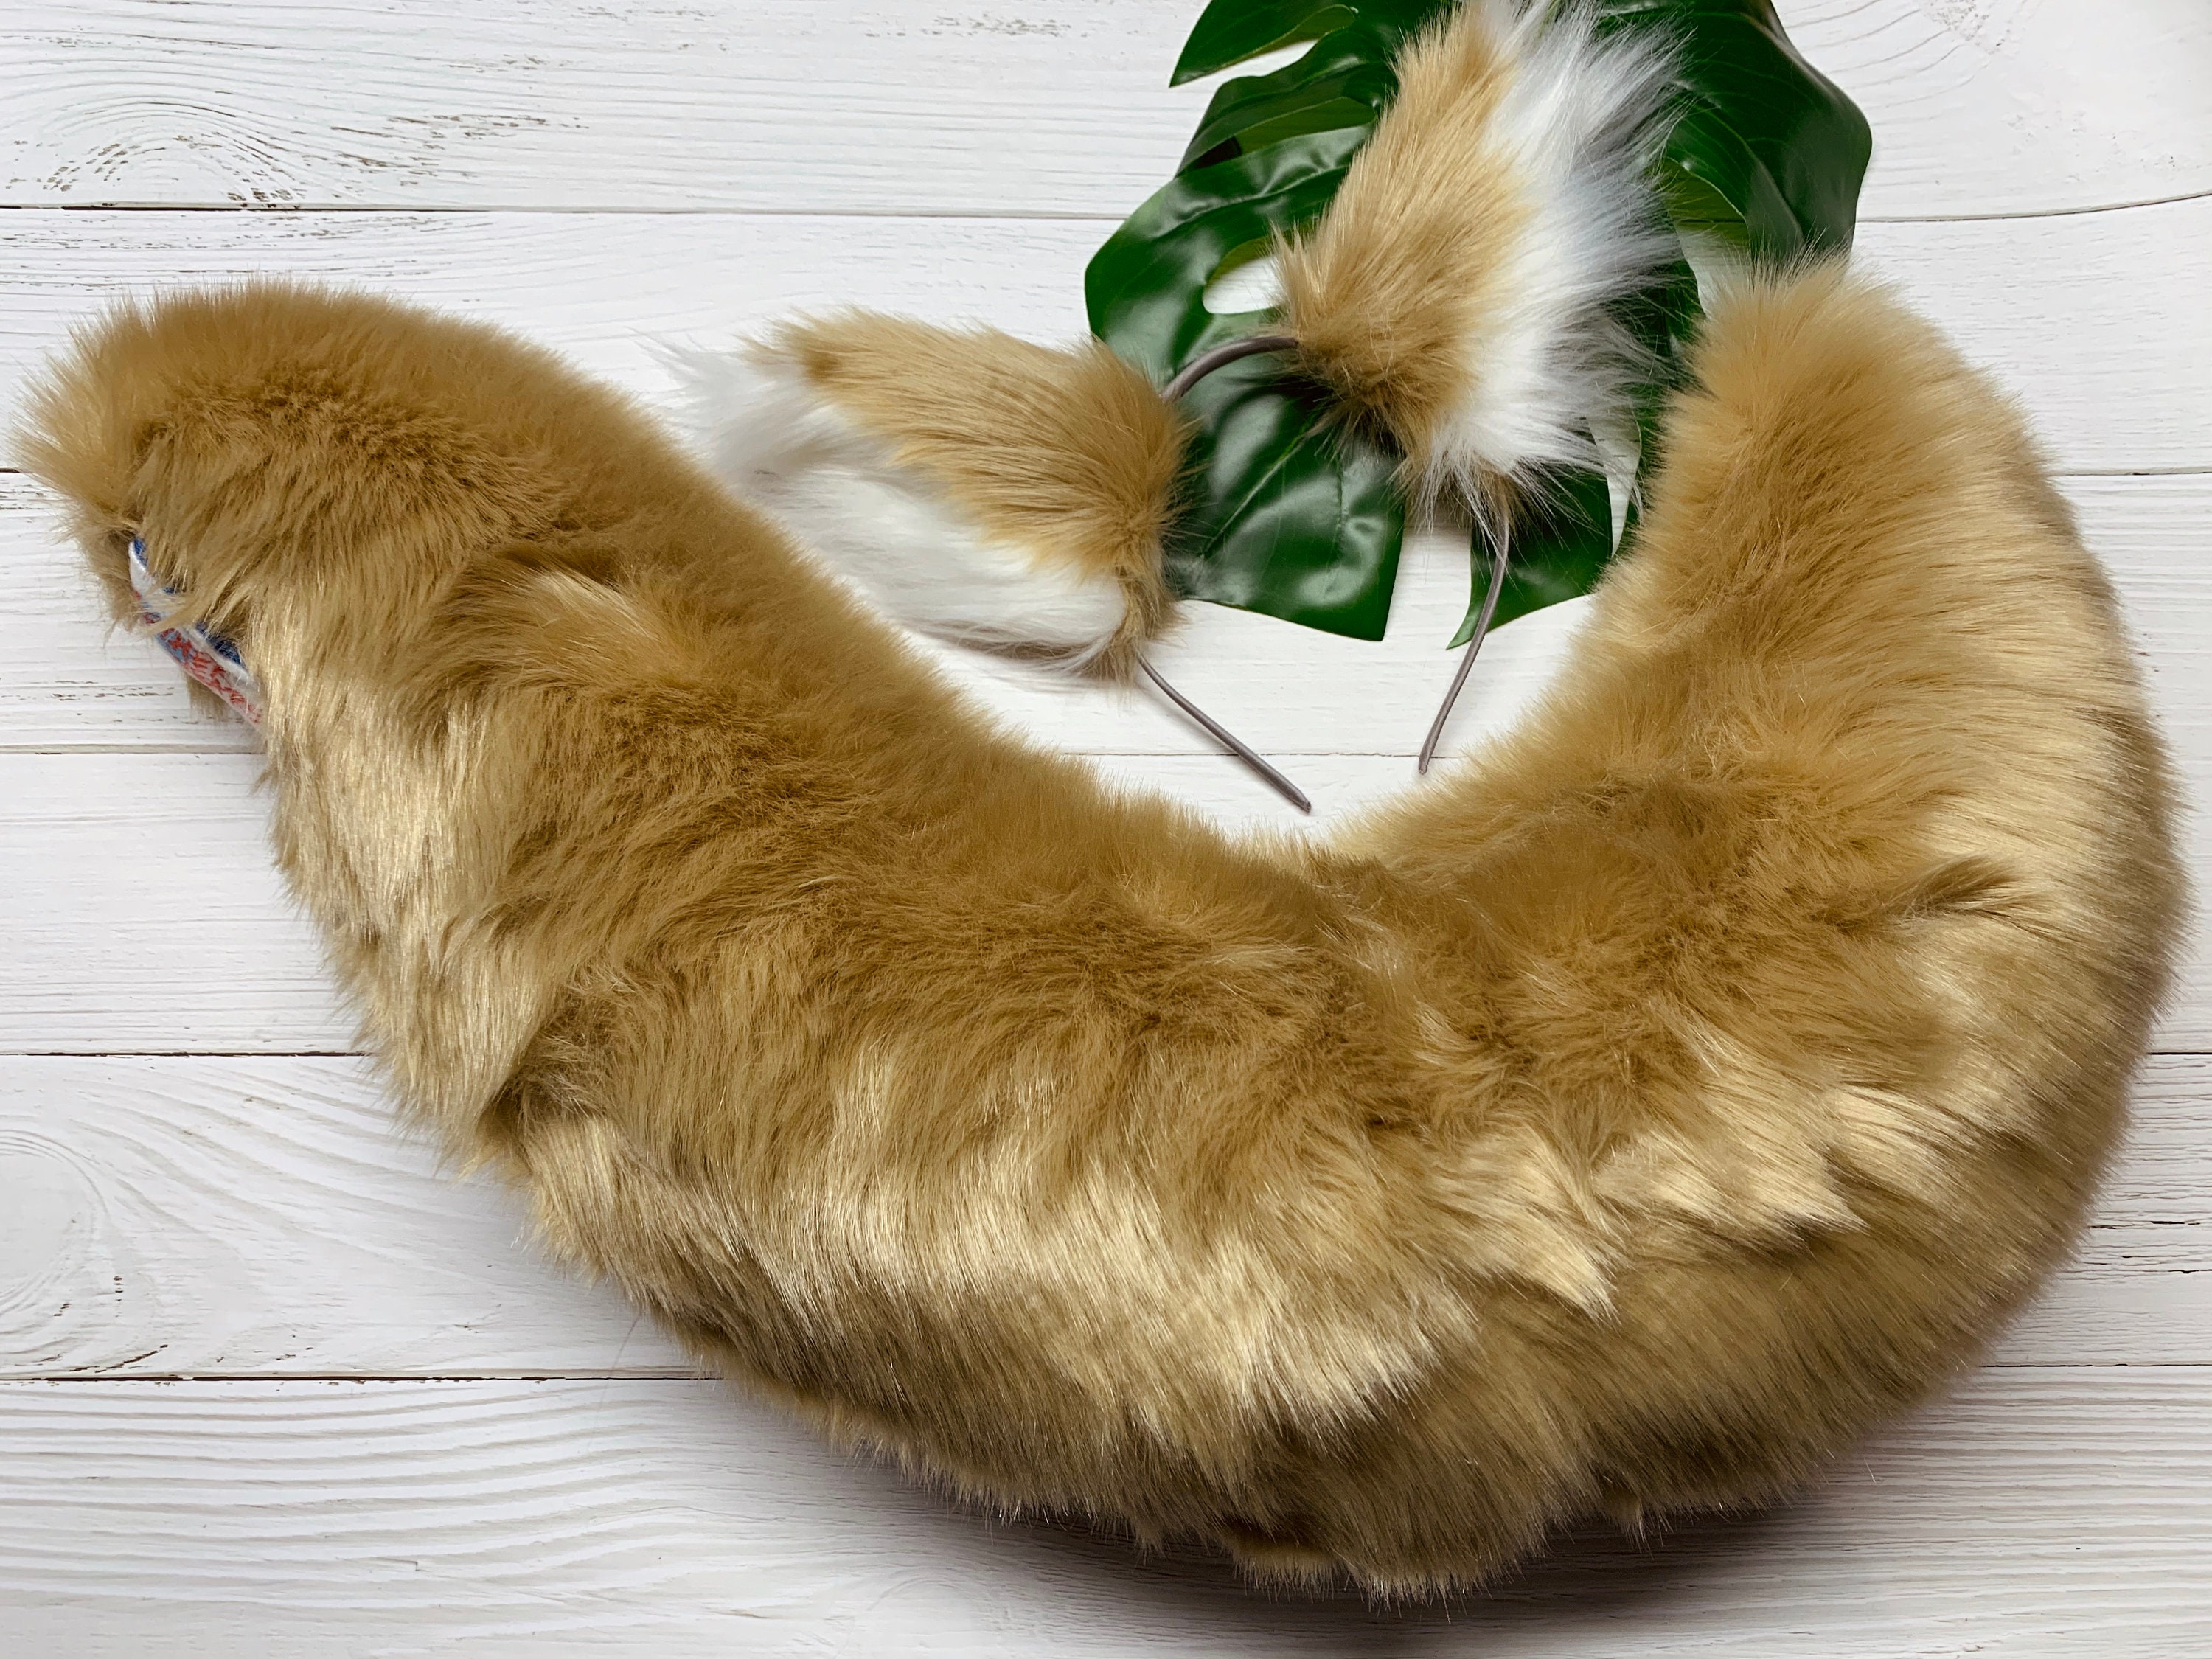 Fox Tail accessory with clip - SWAN CREEK INTERIORS